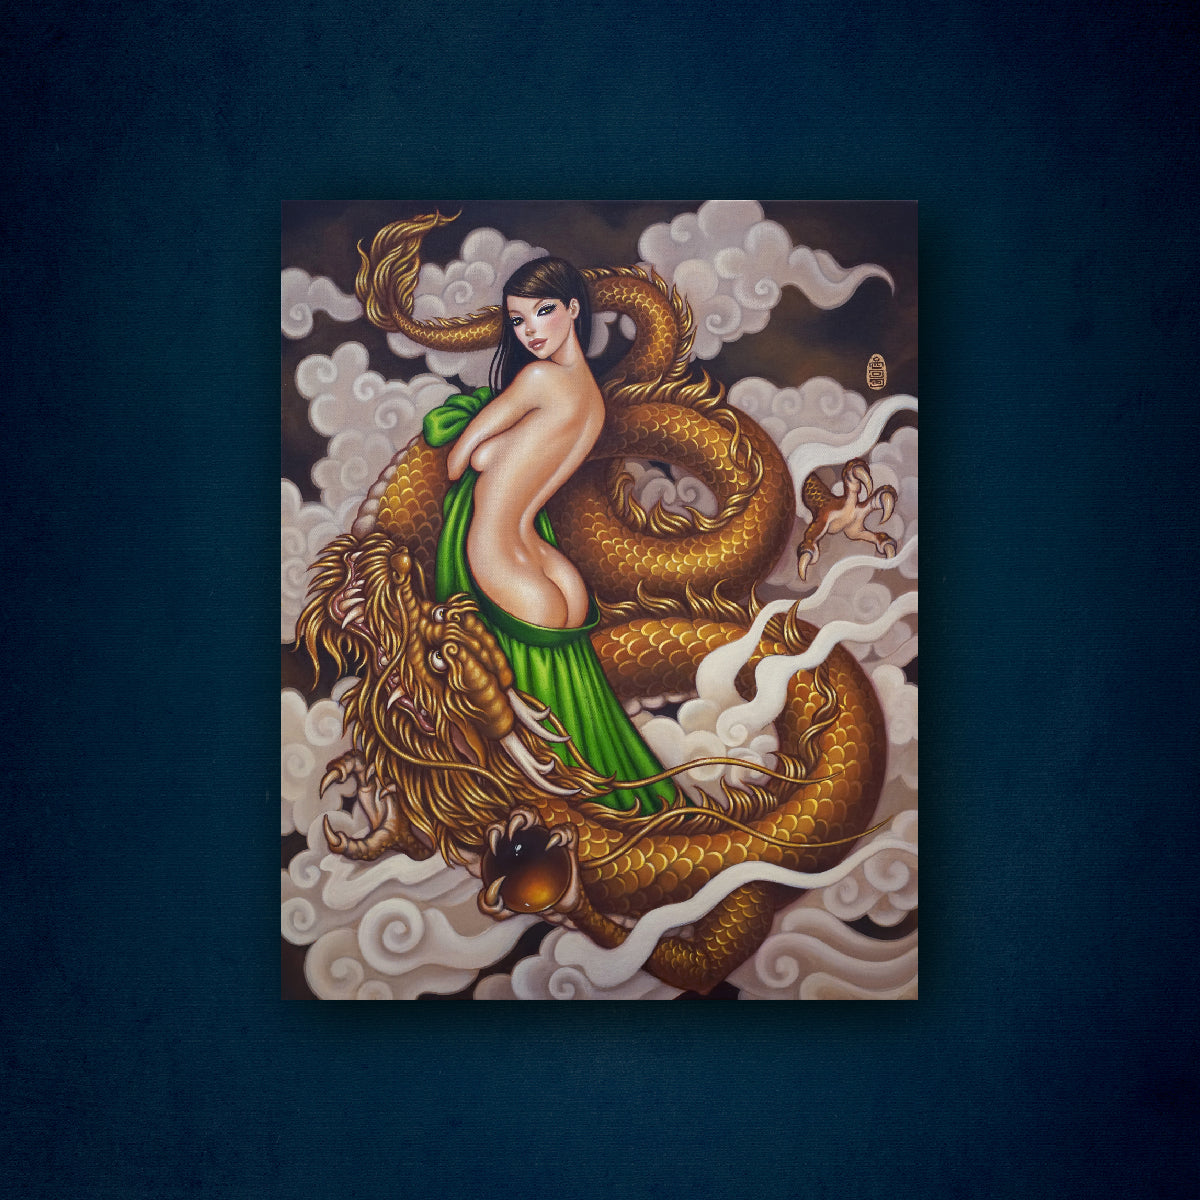 painting by mimi yoon of golden dragon and woman with long dark hair, golden eyes, and a bottle green skirt. They are surrounded by clouds. 